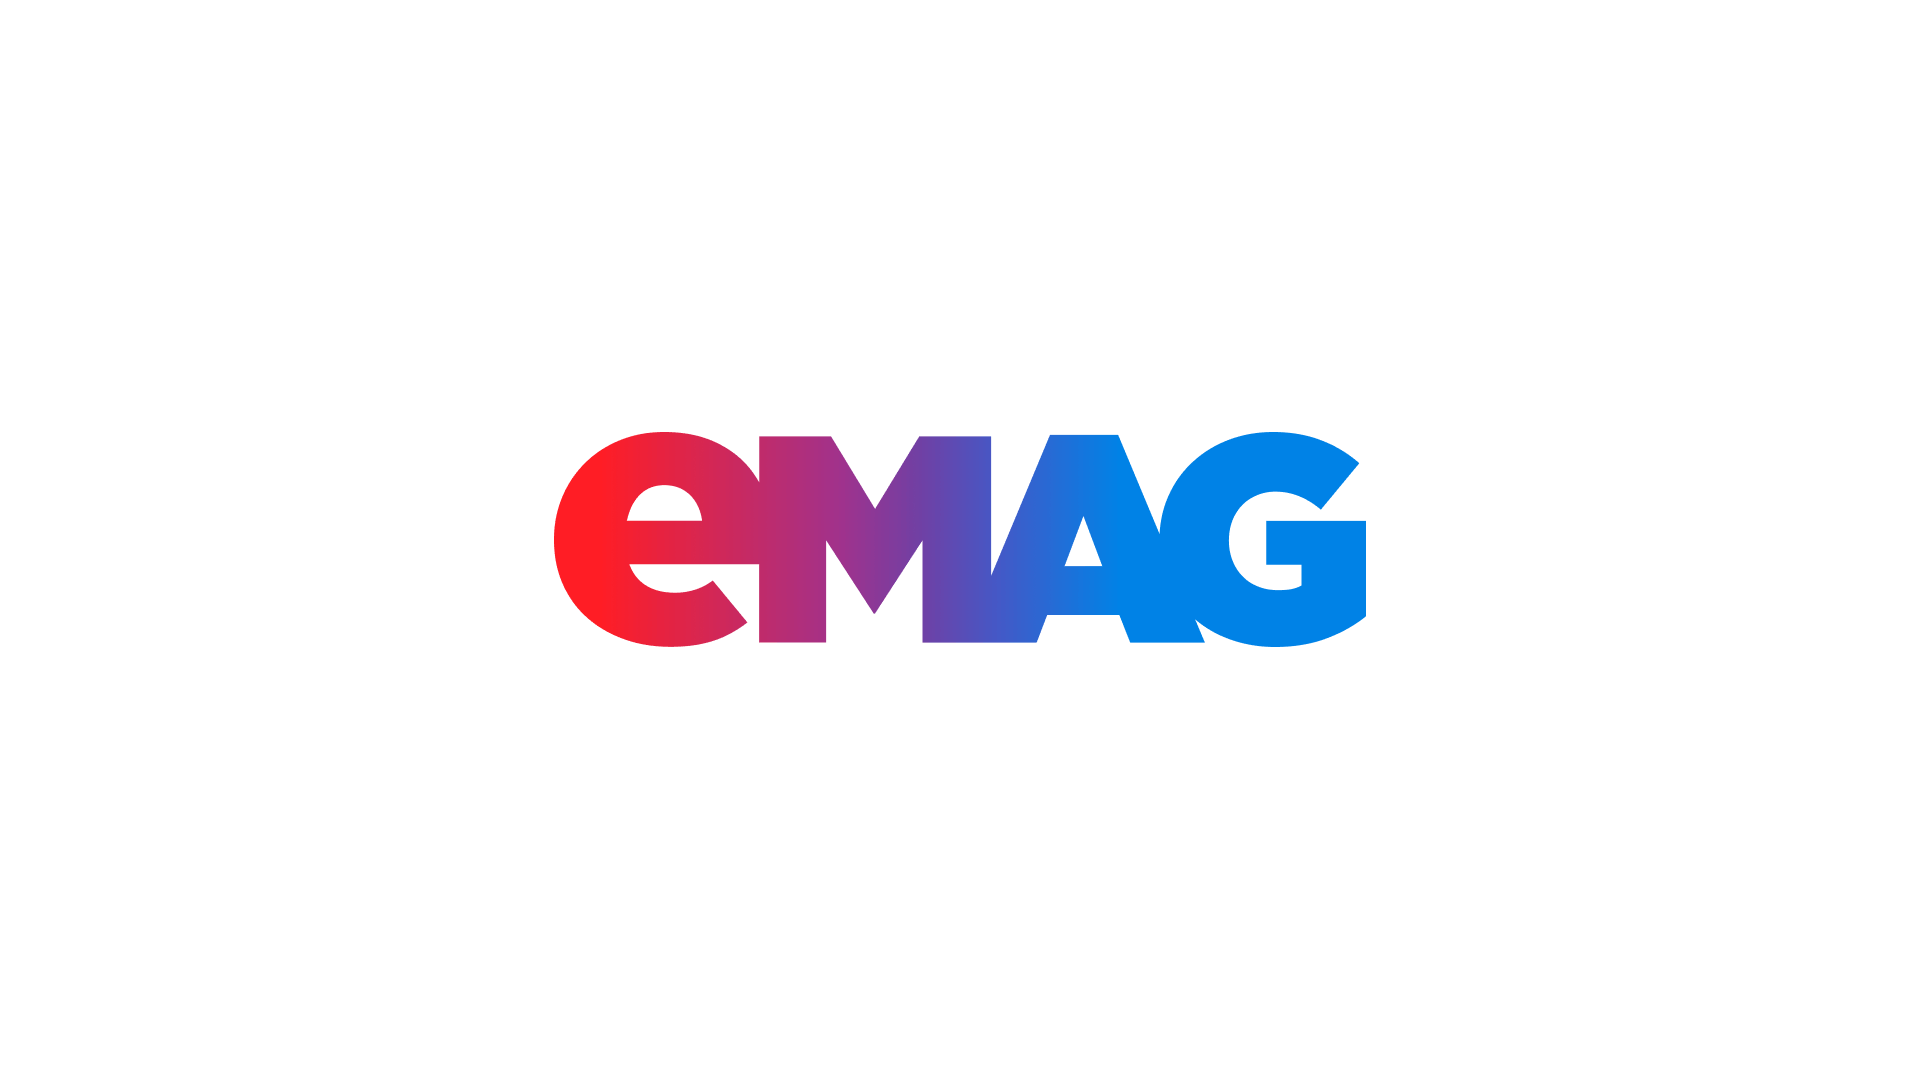 marketplaces_emag_1920x1080